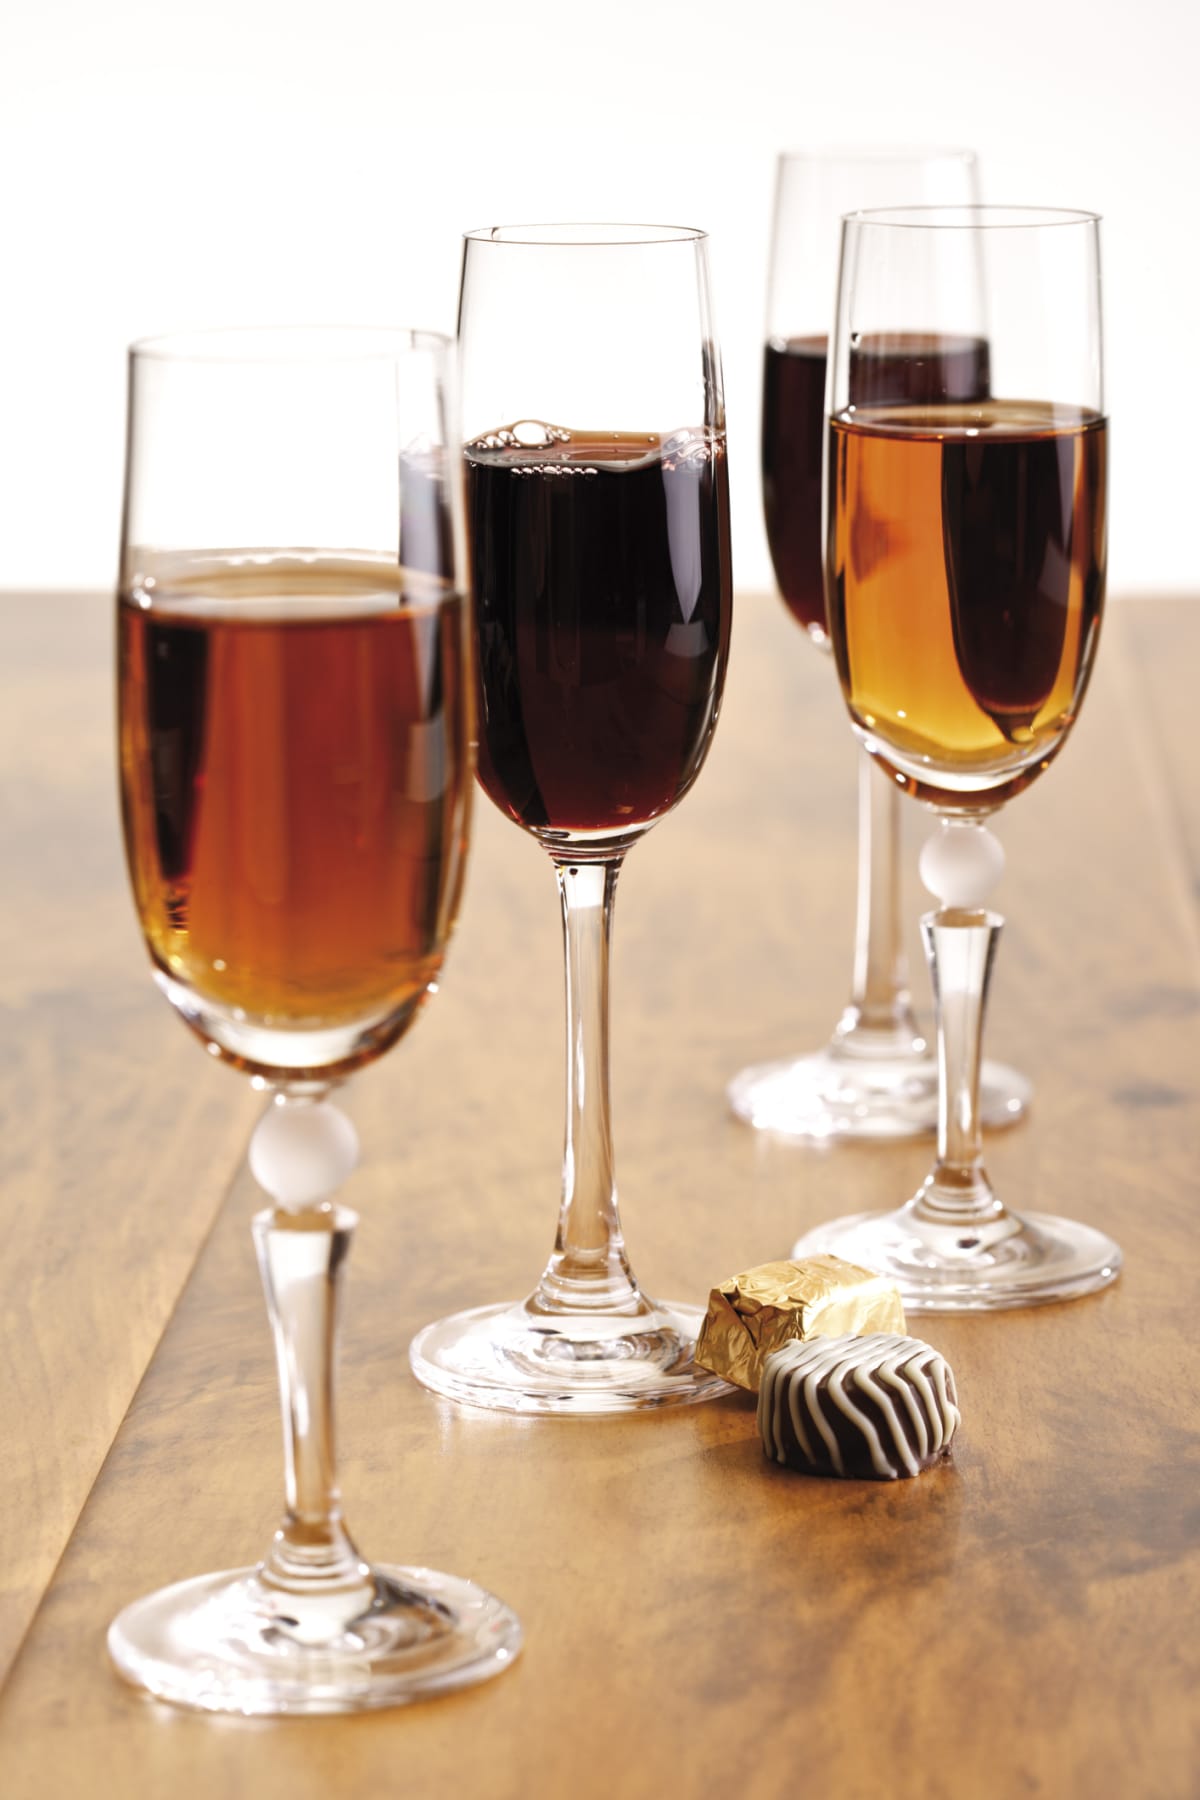 Glasses of Sherry on table